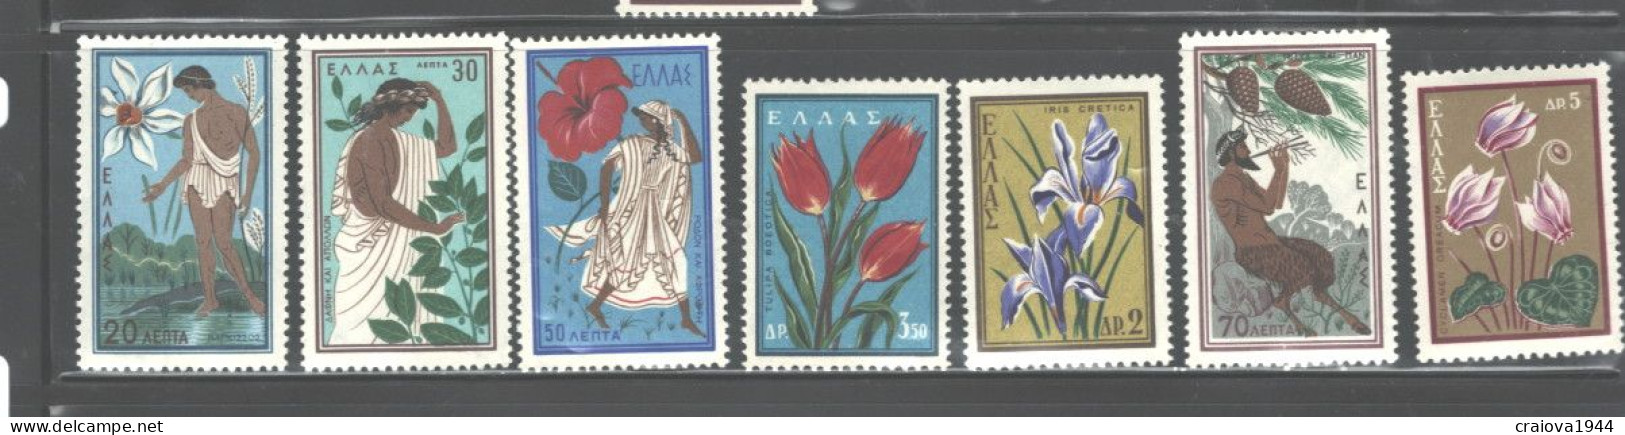 GREECE 1958, PROTECTION Of NATURE CONGRESS, ATHENS #624-631 MNH - Ungebraucht